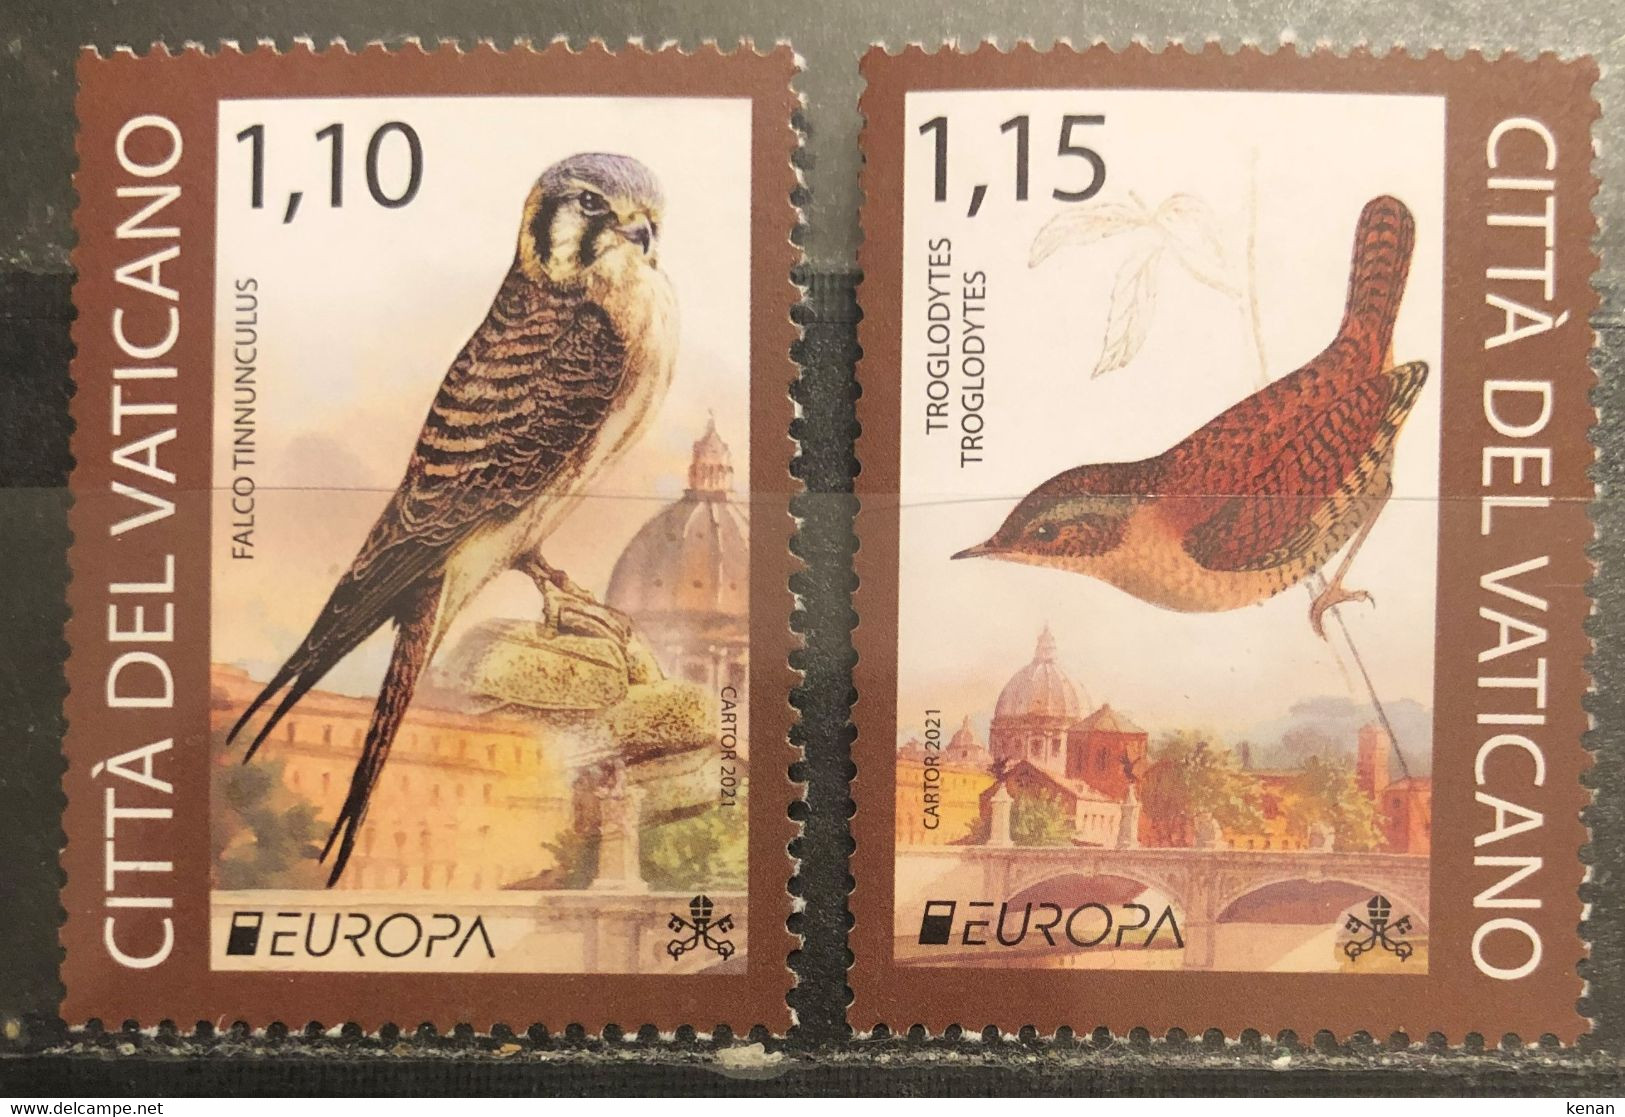 Vatican, 2021, EUROPA Stamps - Endangered National Wildlife (MNH) - Unused Stamps